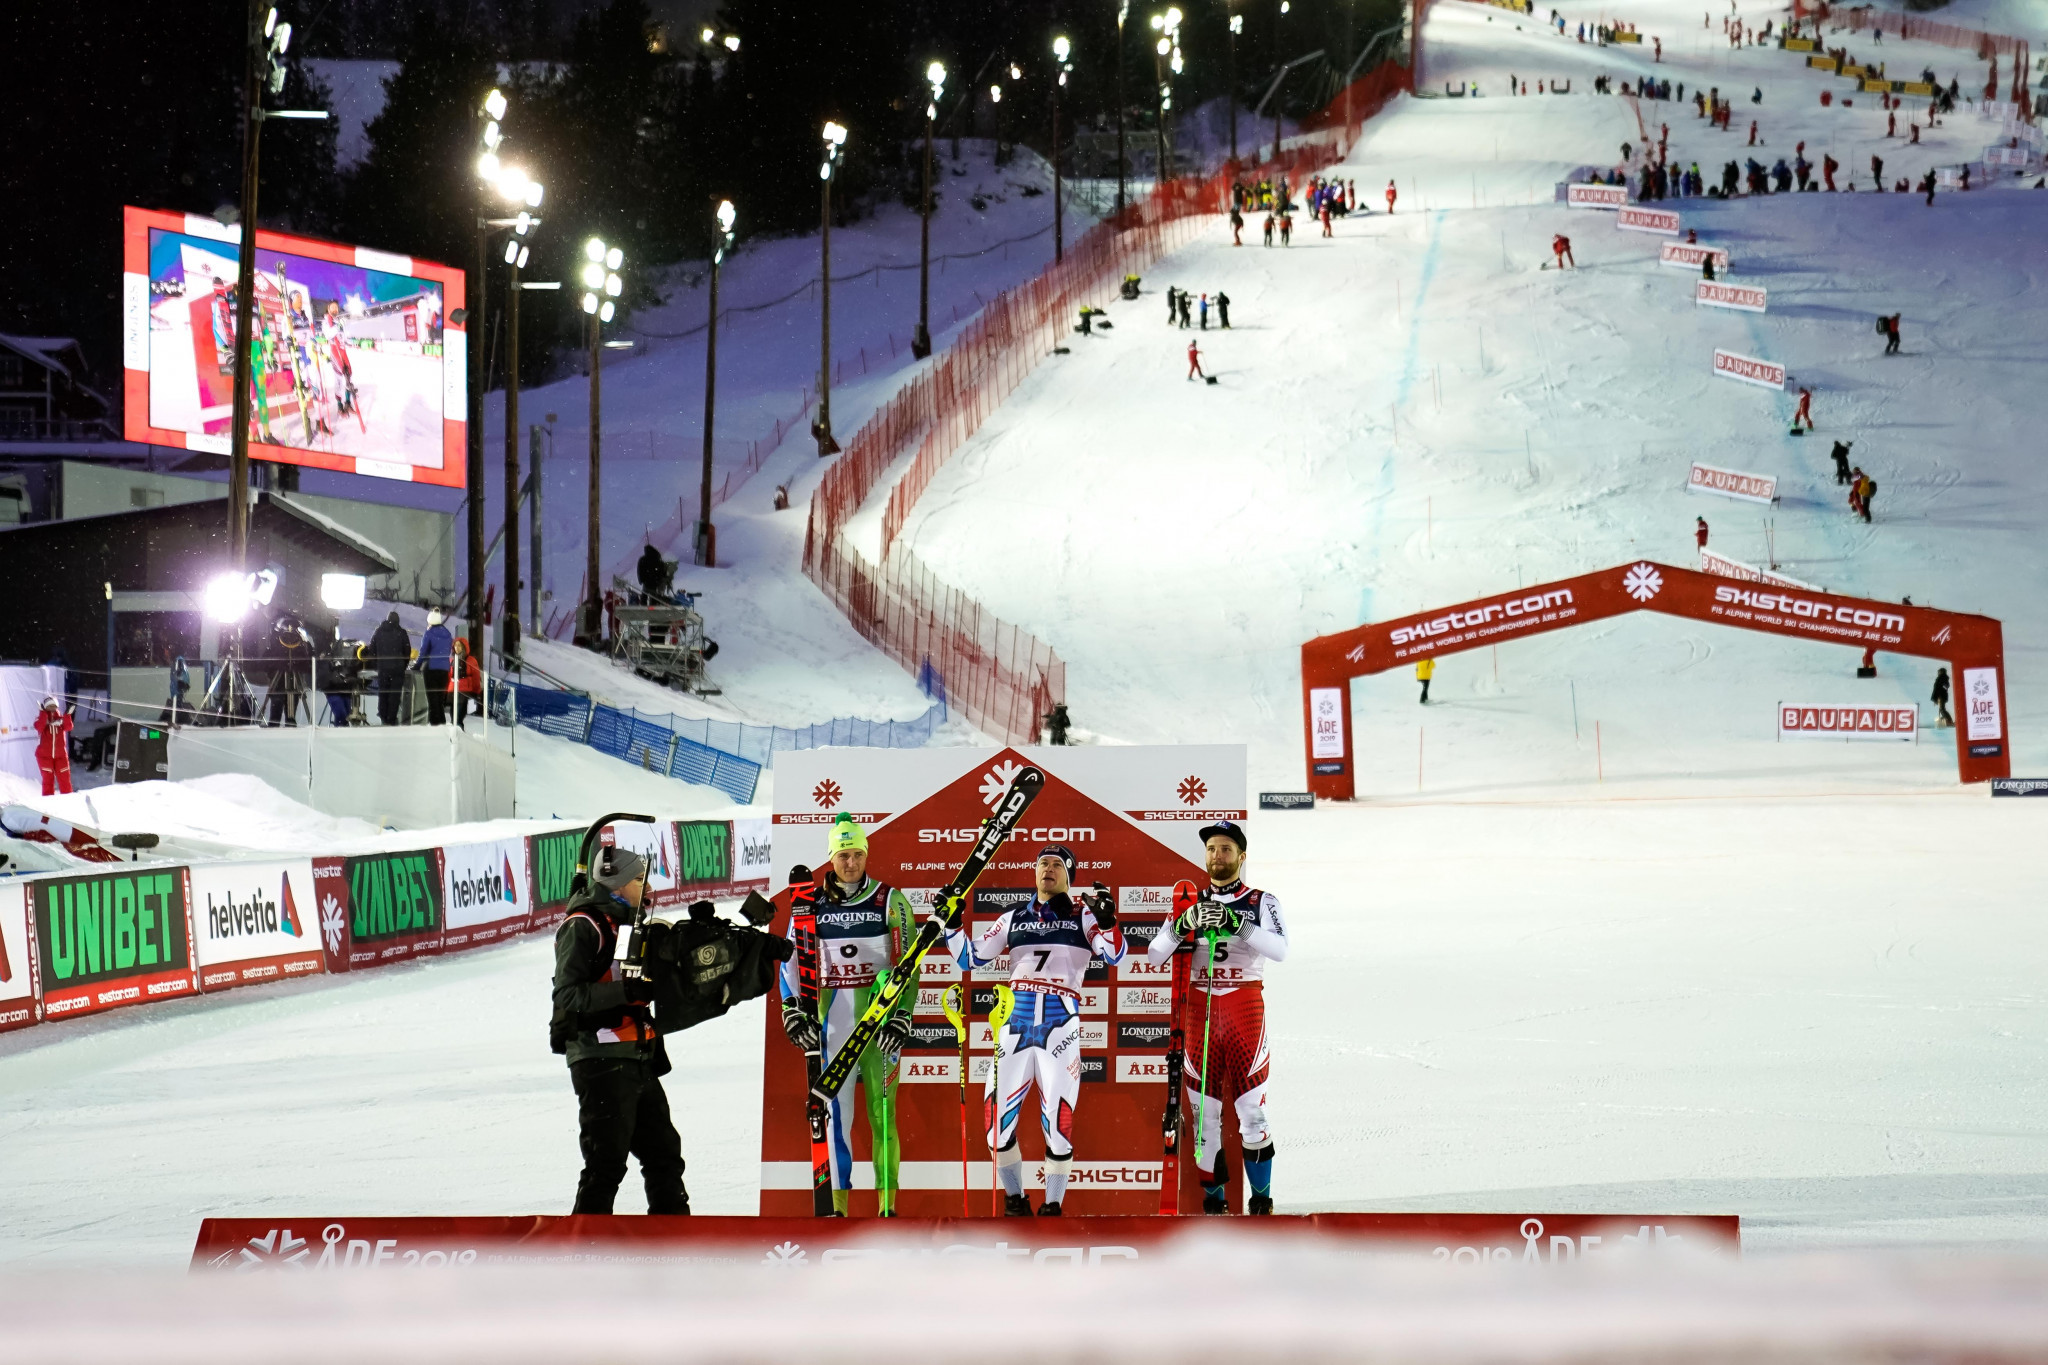 A ceremony took place at the bottom of the competition slope ©Getty Images